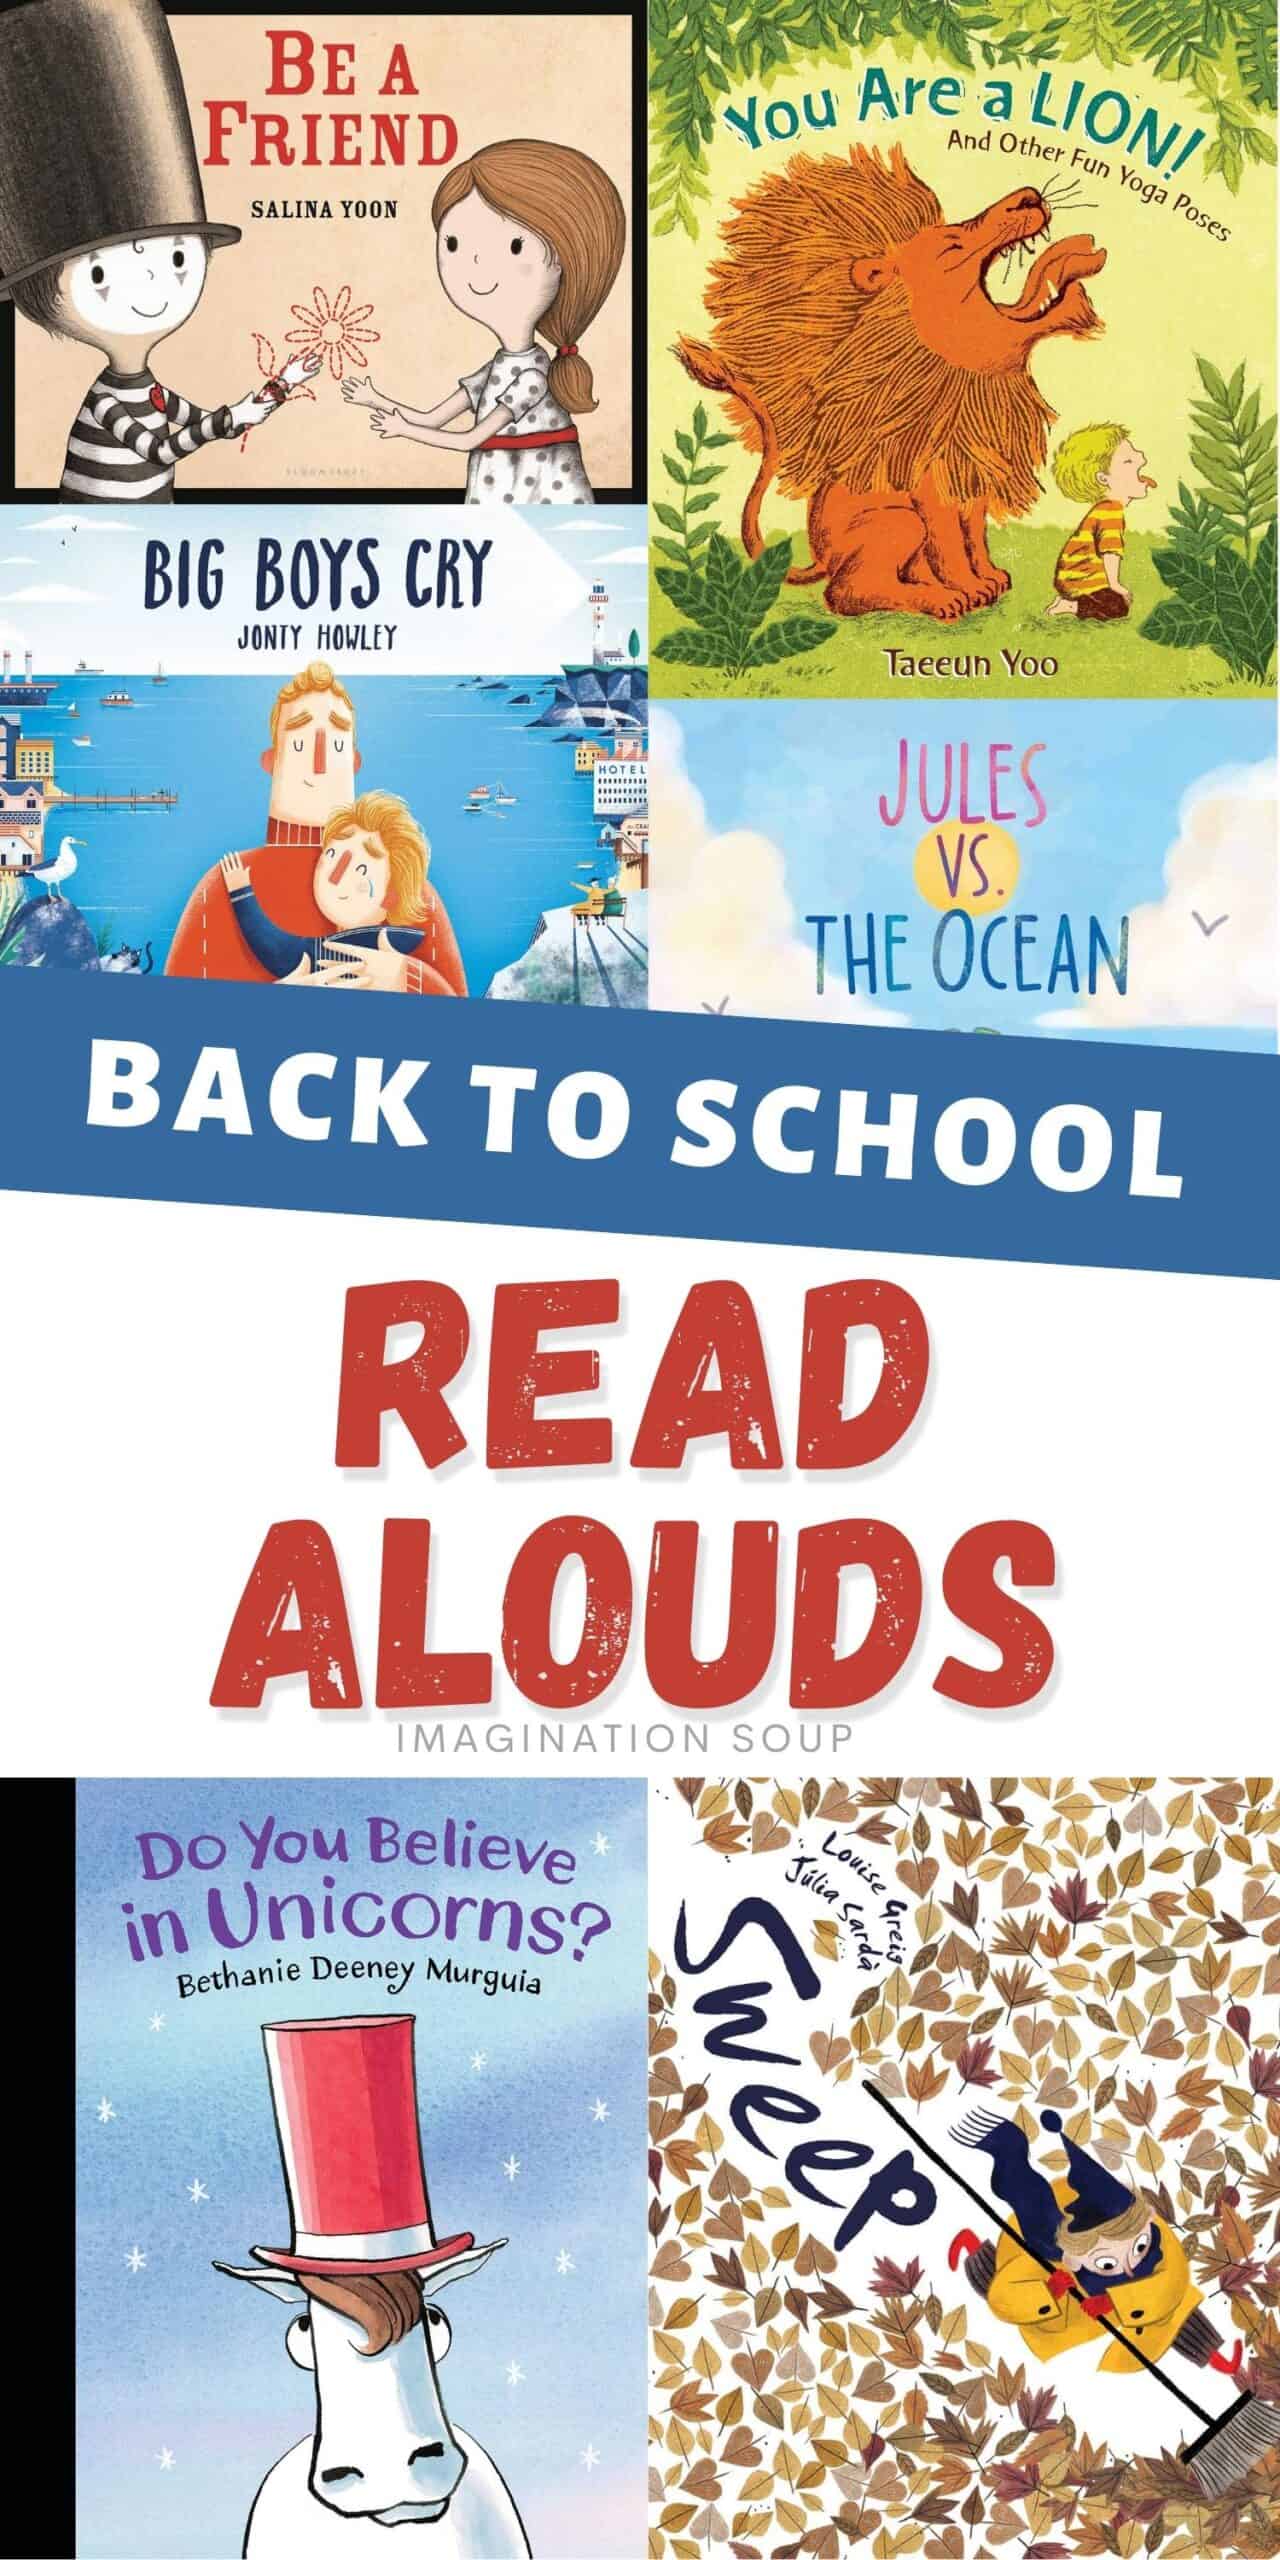 Back to school read alouds for teachers